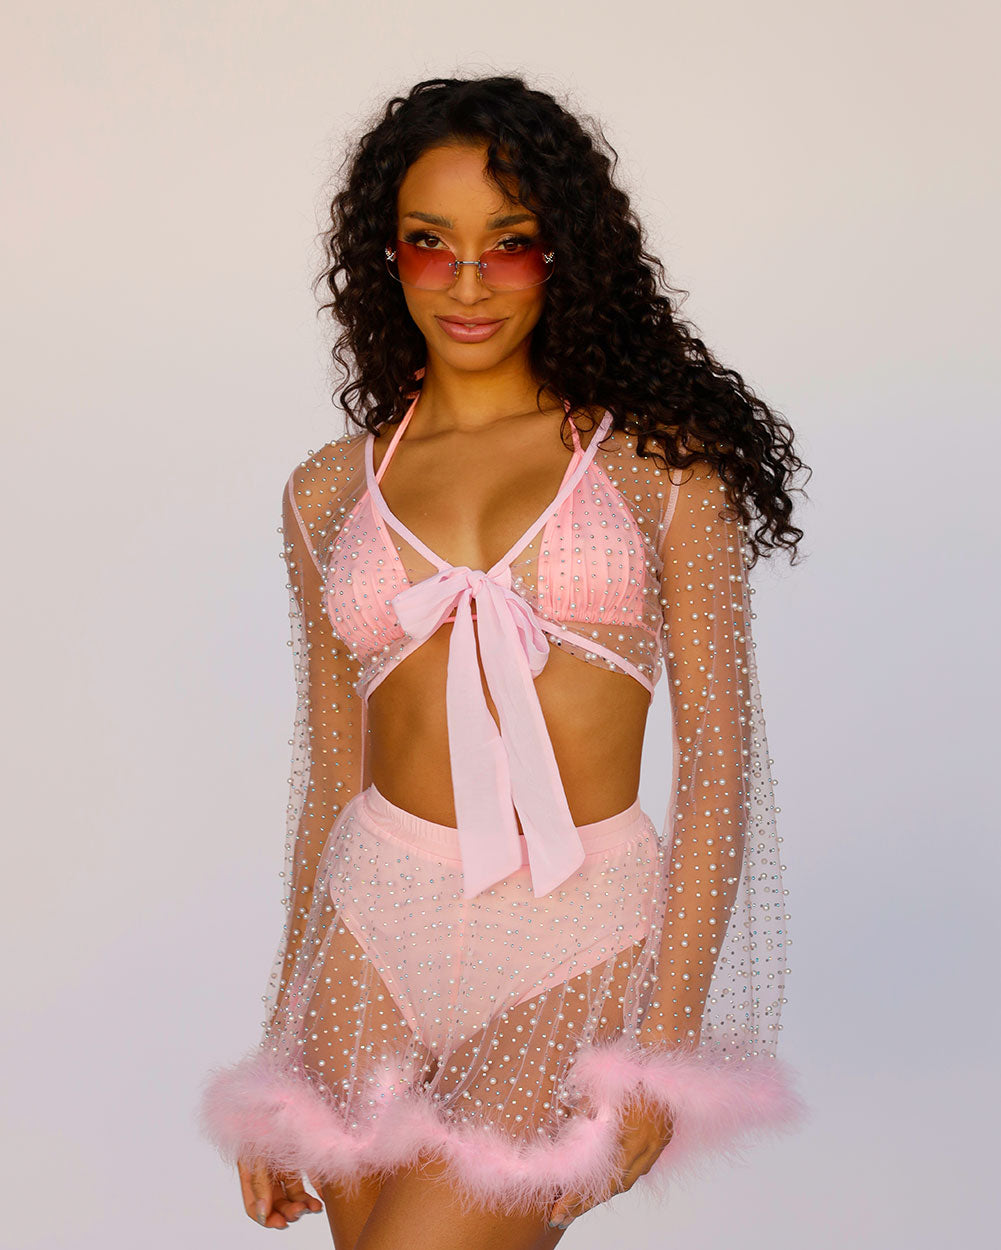 Fishnet Rave Clothing - Tops, Bottoms, Accessories